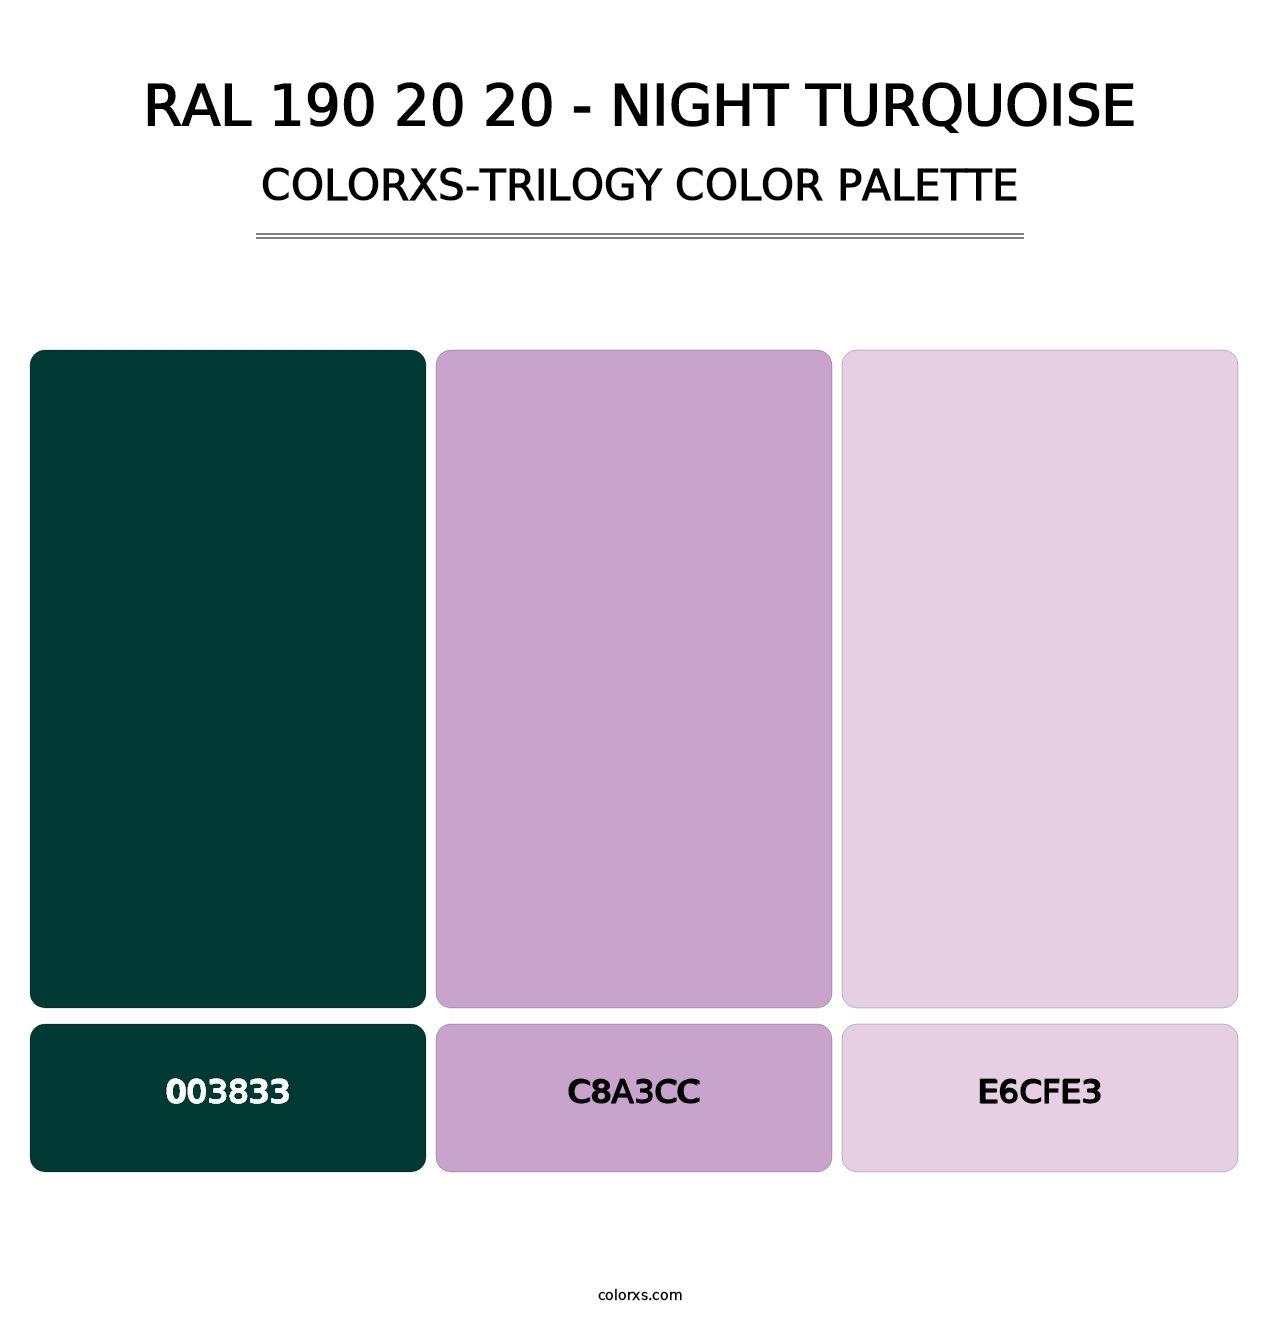 RAL 190 20 20 - Night Turquoise - Colorxs Trilogy Palette